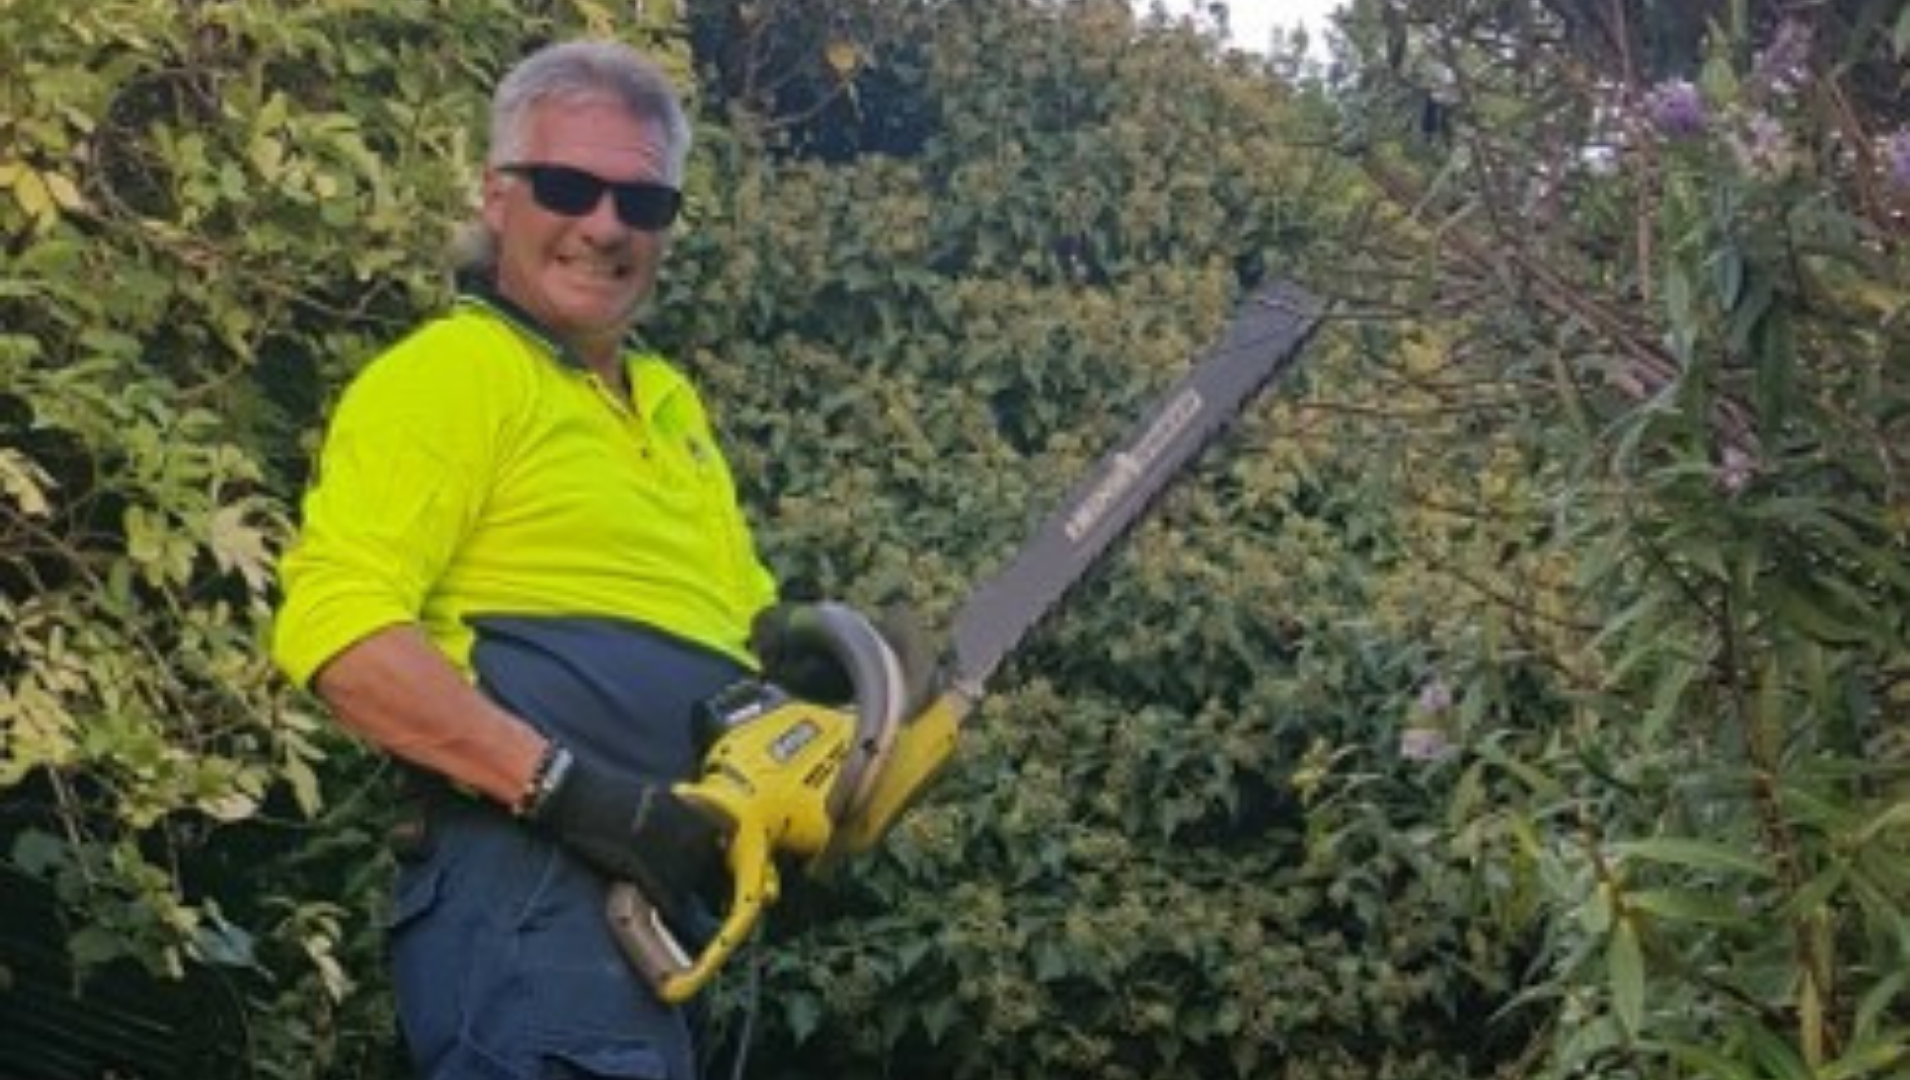 Wayne standing in front of an overgrown tree, in his hi-vis uniform, holding a chainsaw and smiling